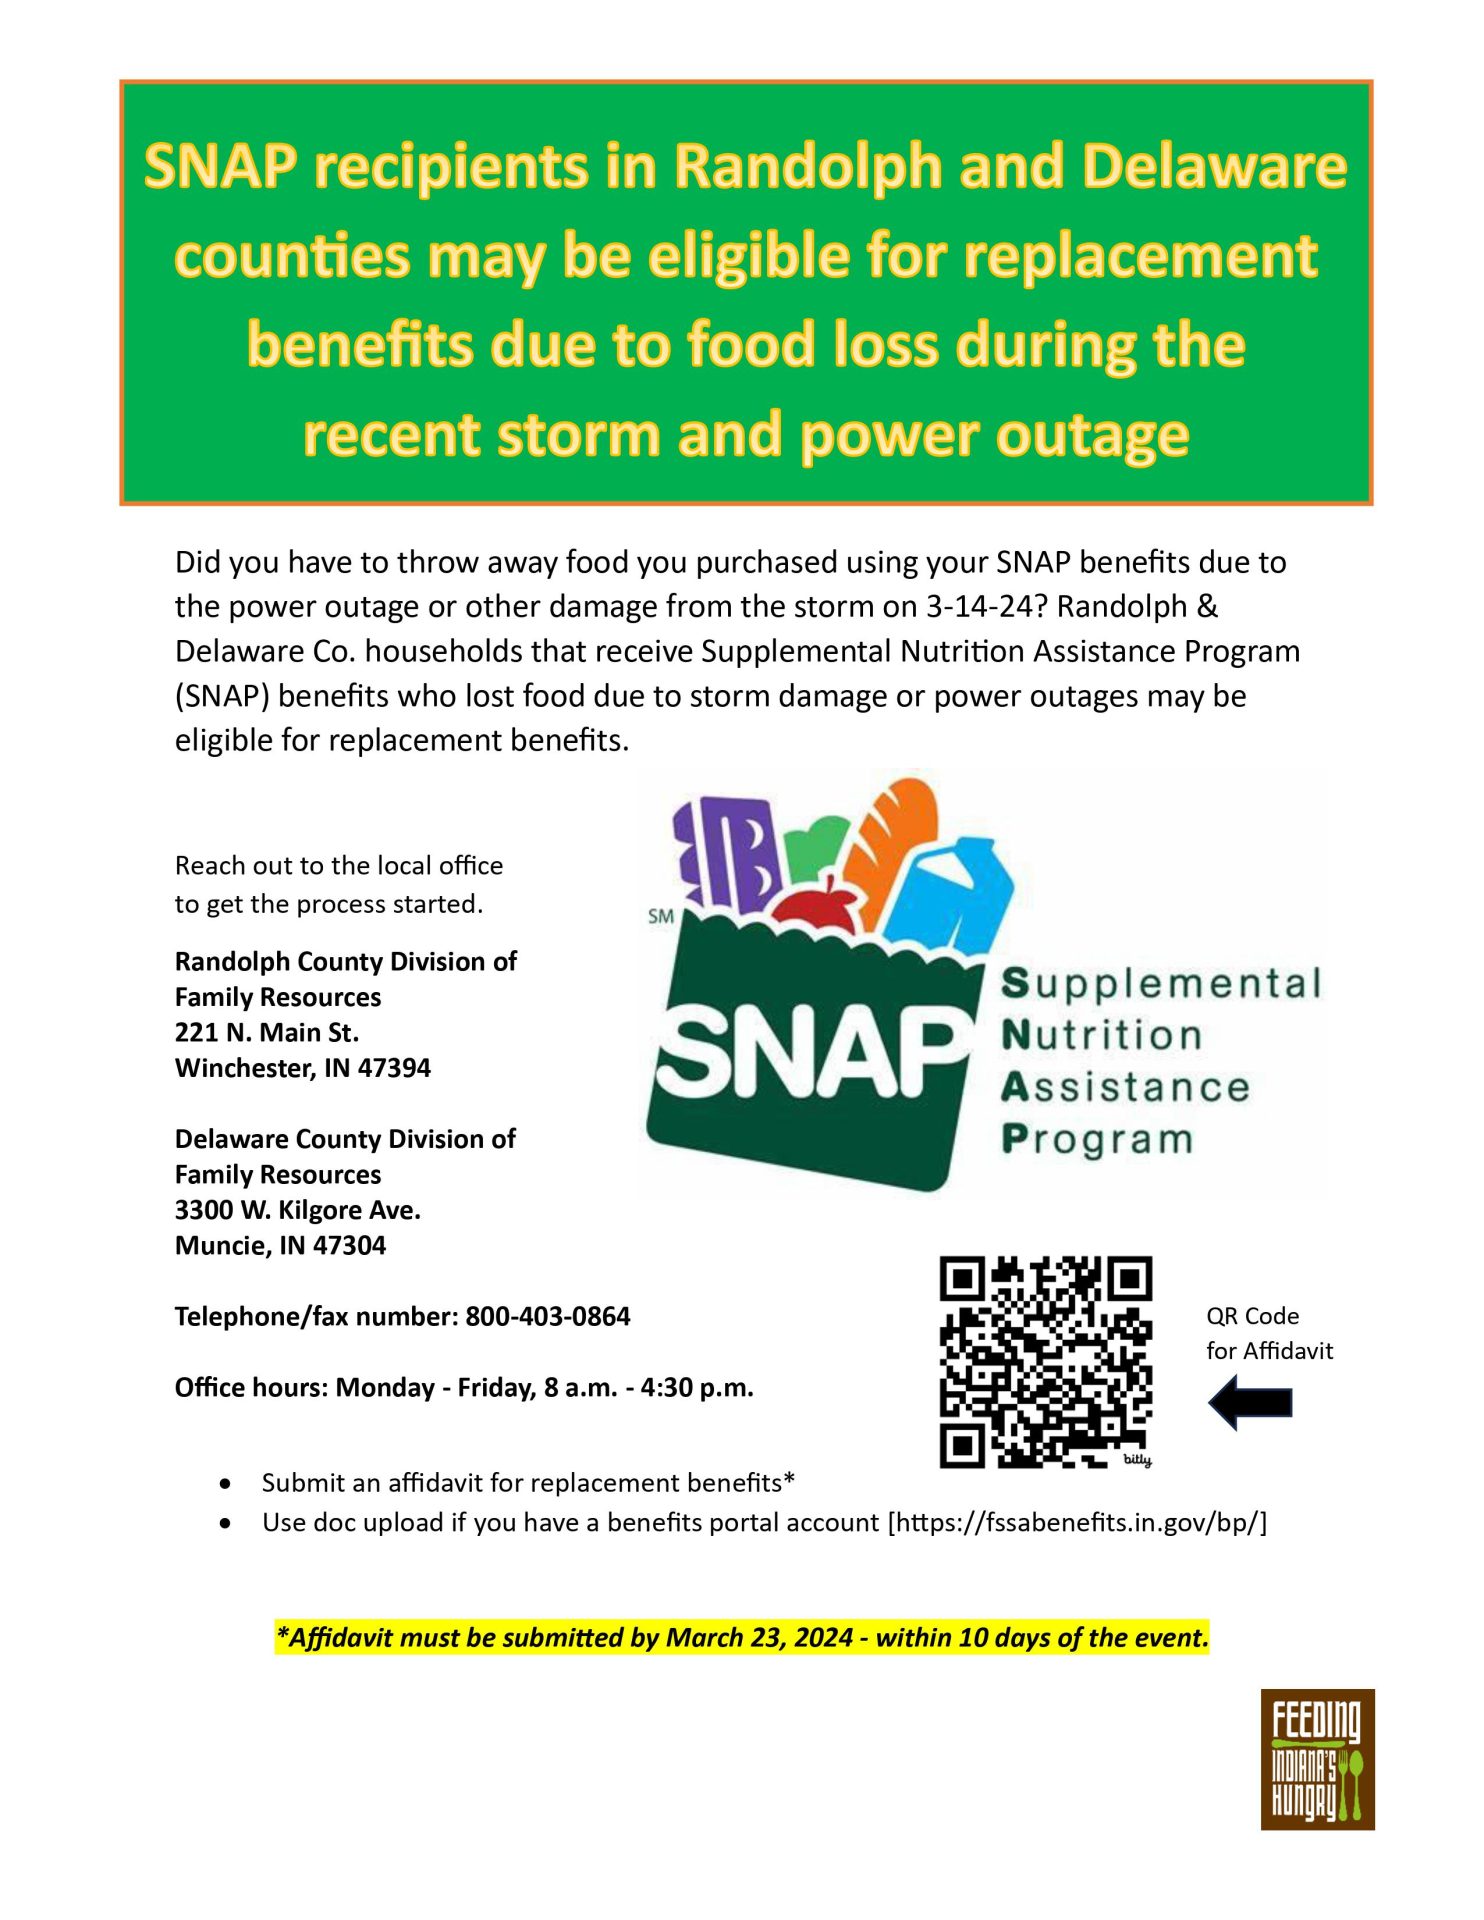 SNAP recipients in Randolph and Delaware counties may be eligible for replacement benefits due to food loss during the  recent storm and power outage